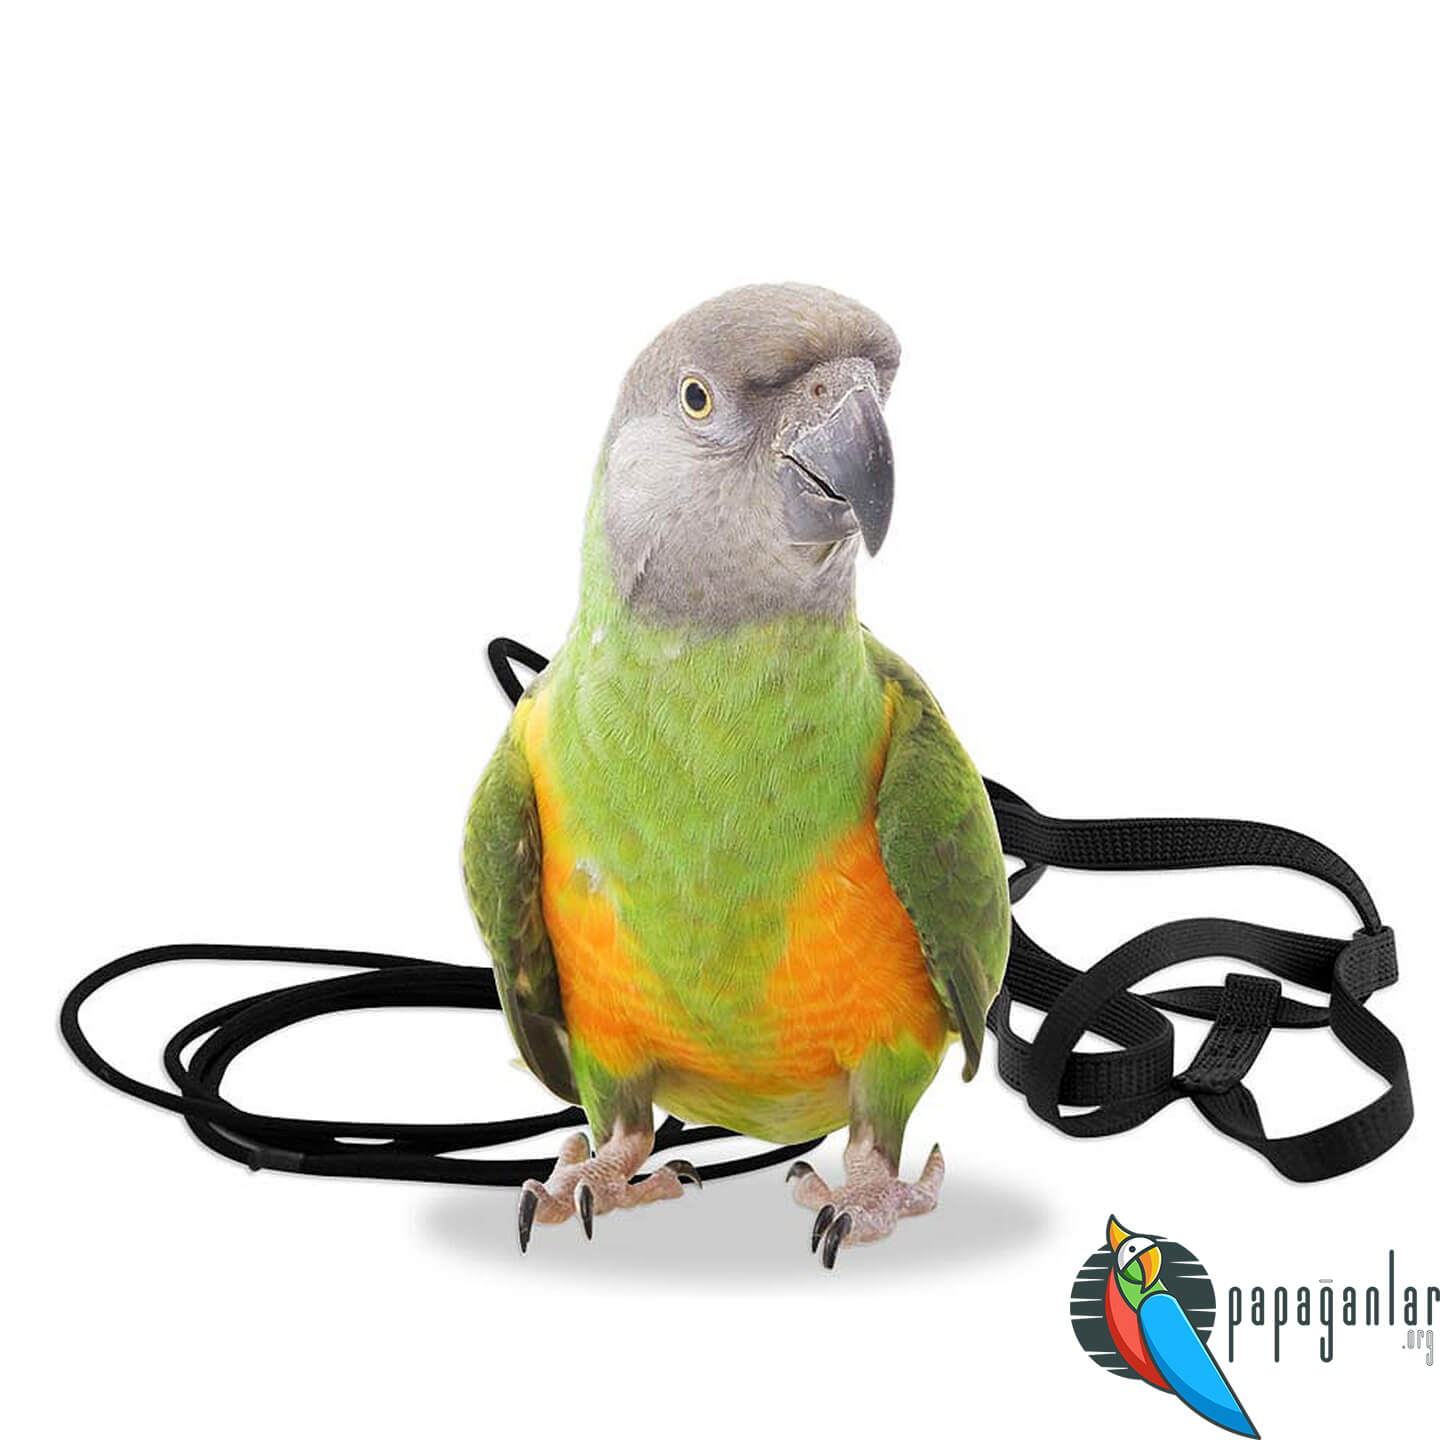 Is Parrot Collar Harmful?